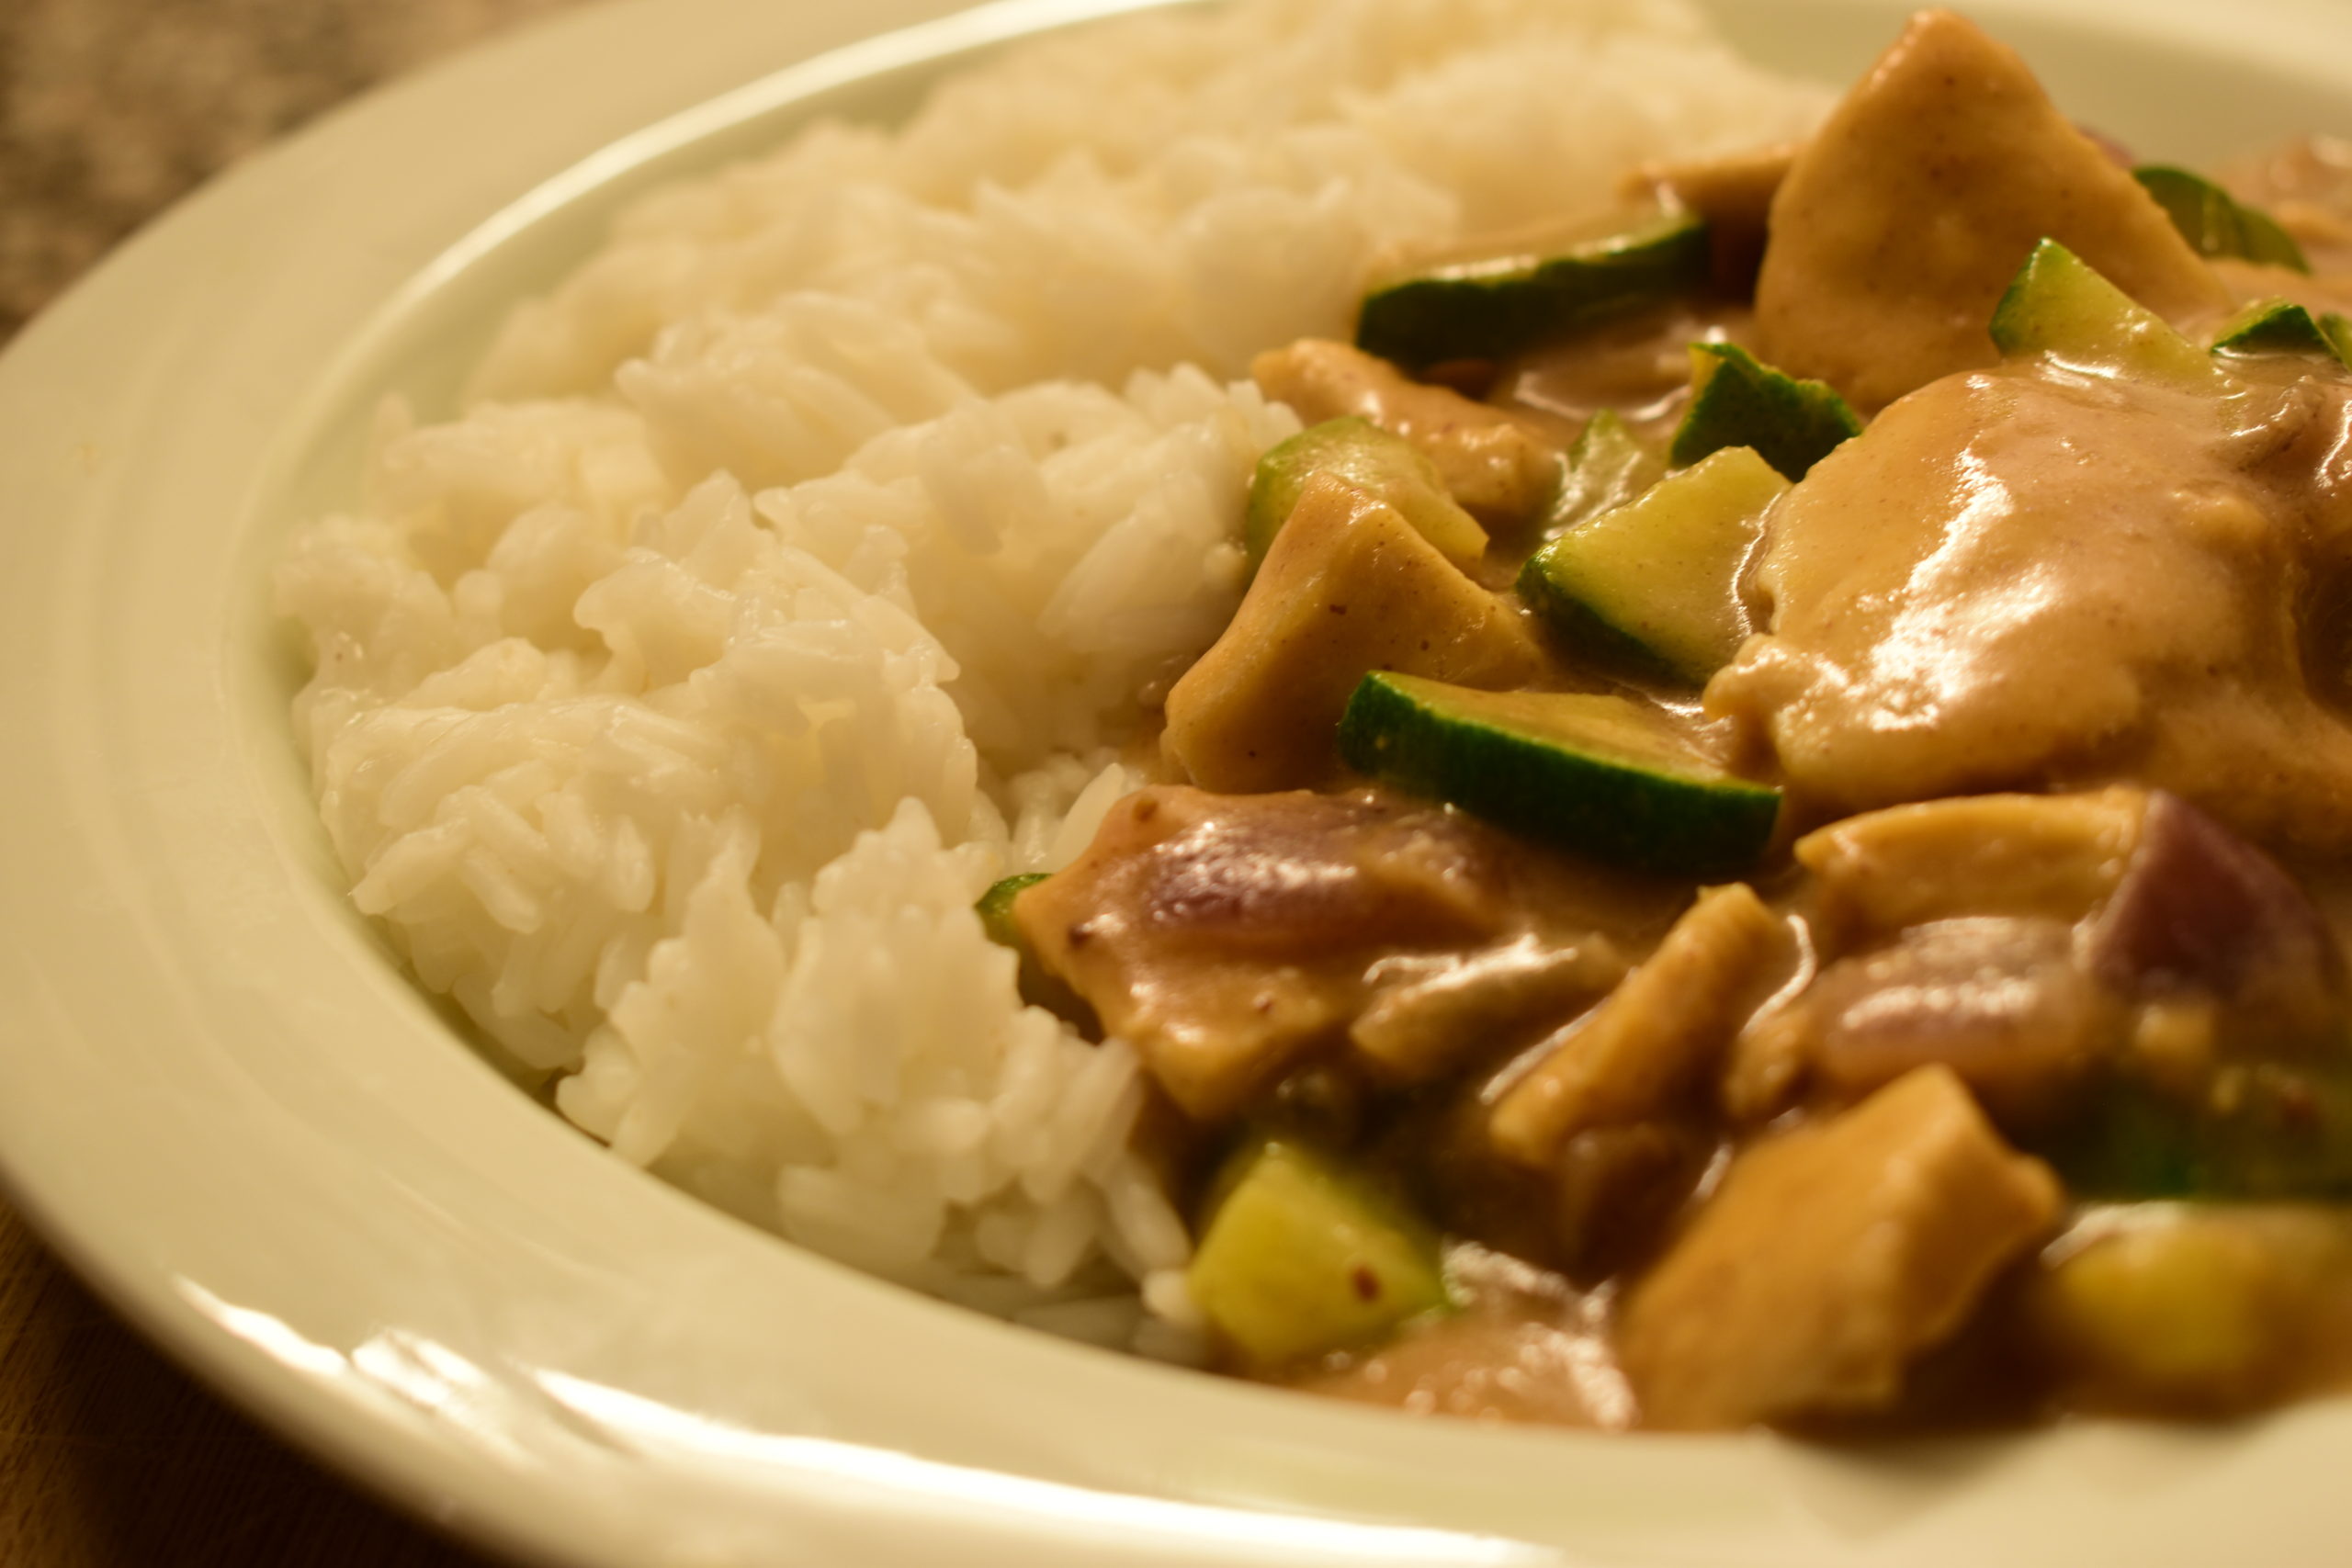 Peanut butter chicken and zucchini with basmati or jasmine rice